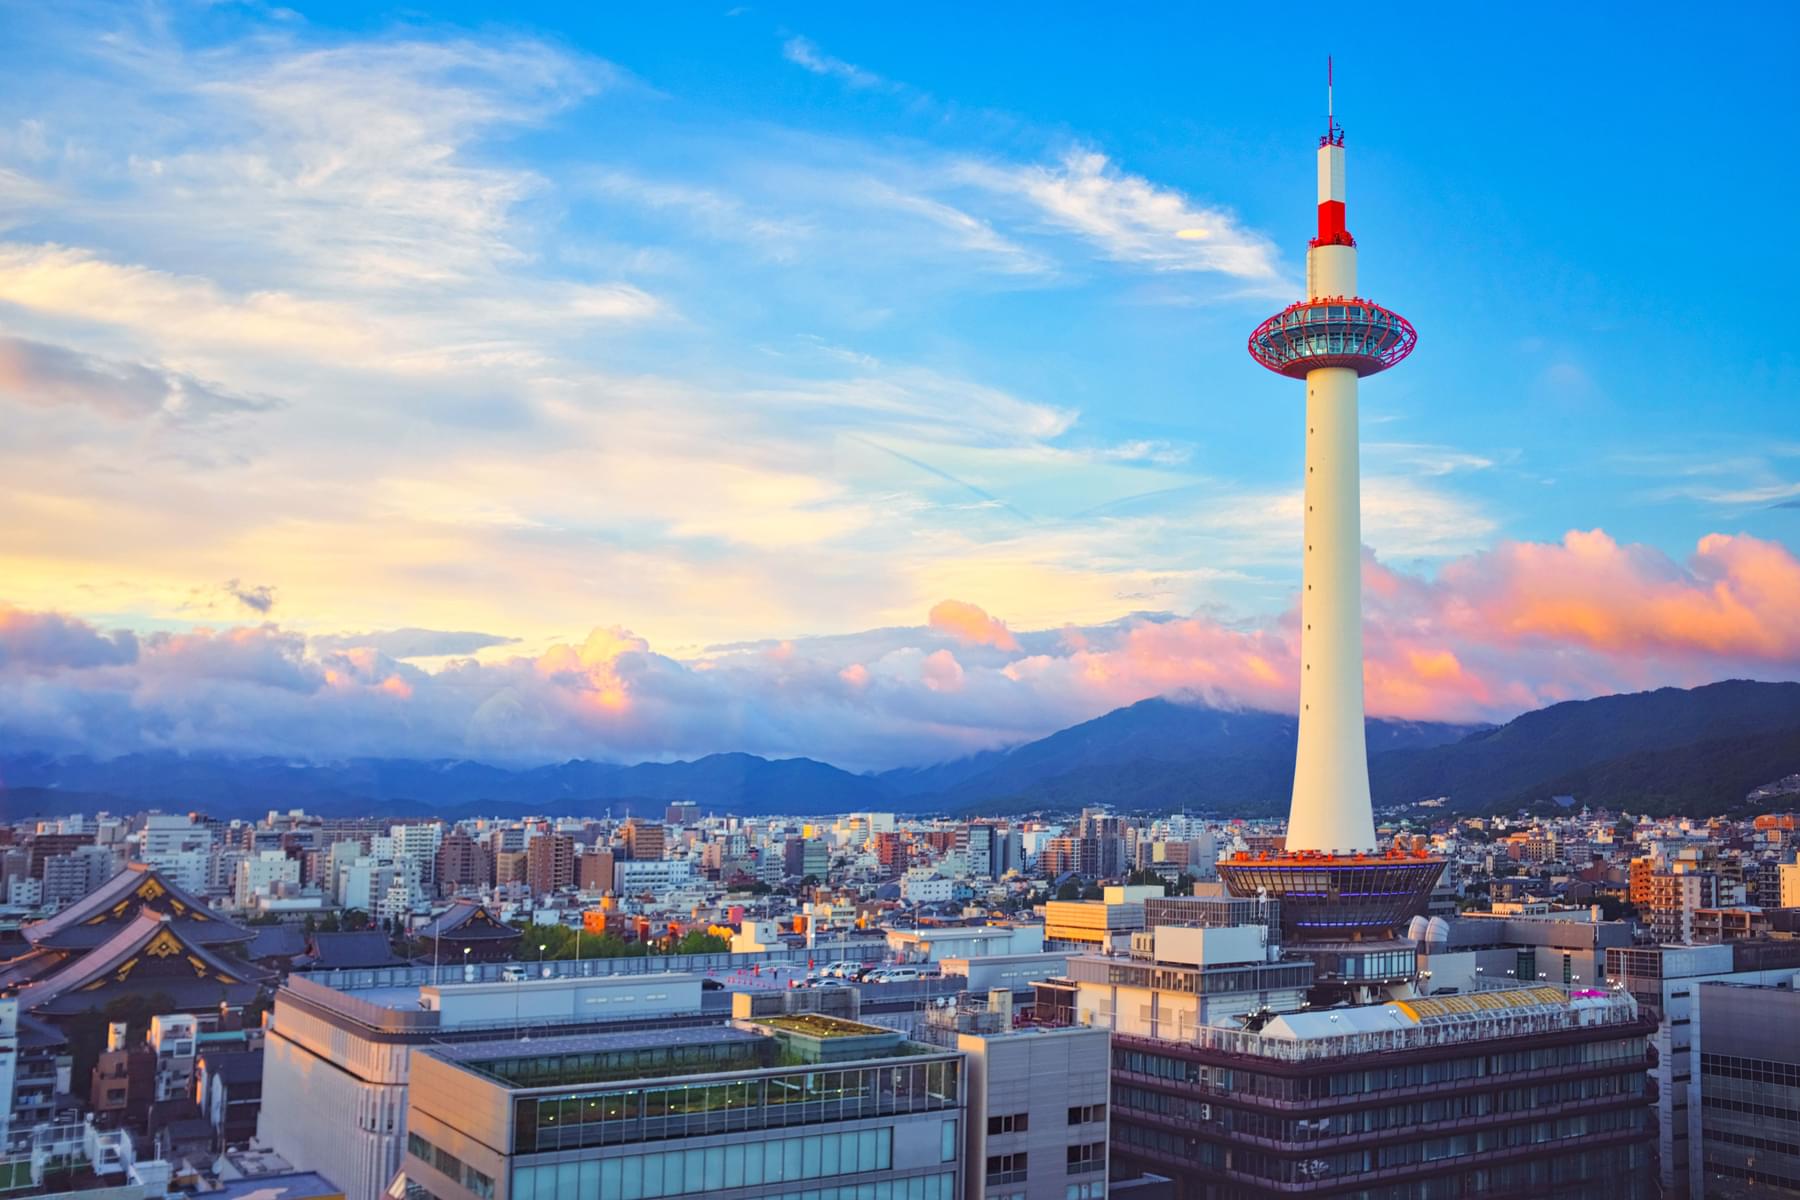 About Kyoto Tower Tickets